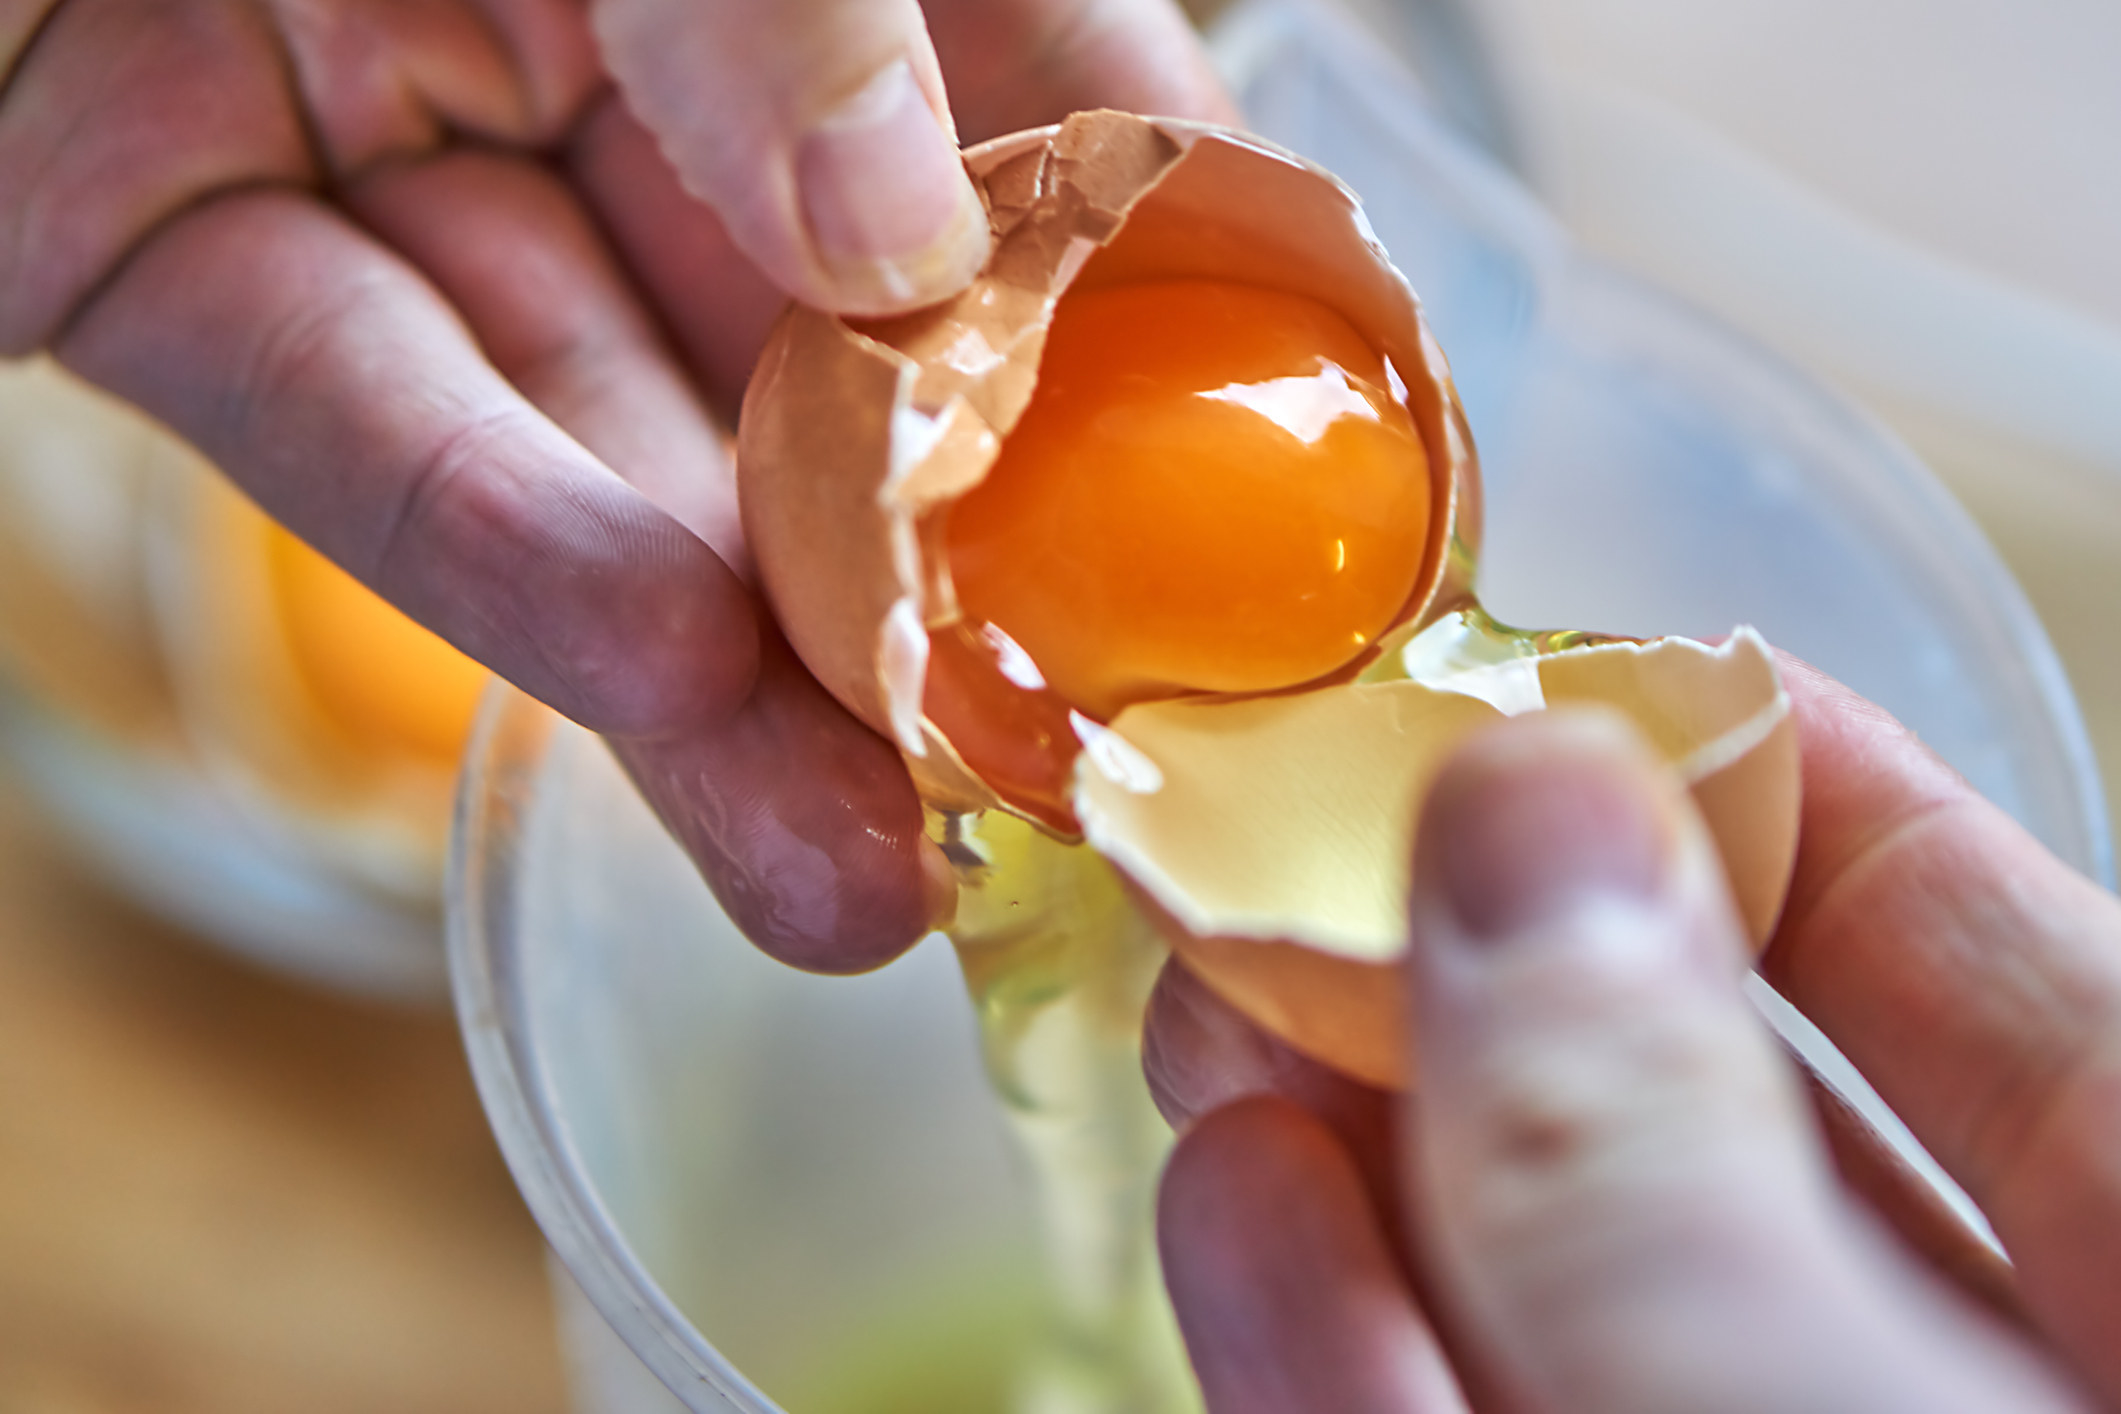 Hands separating an egg yolk from the whites.